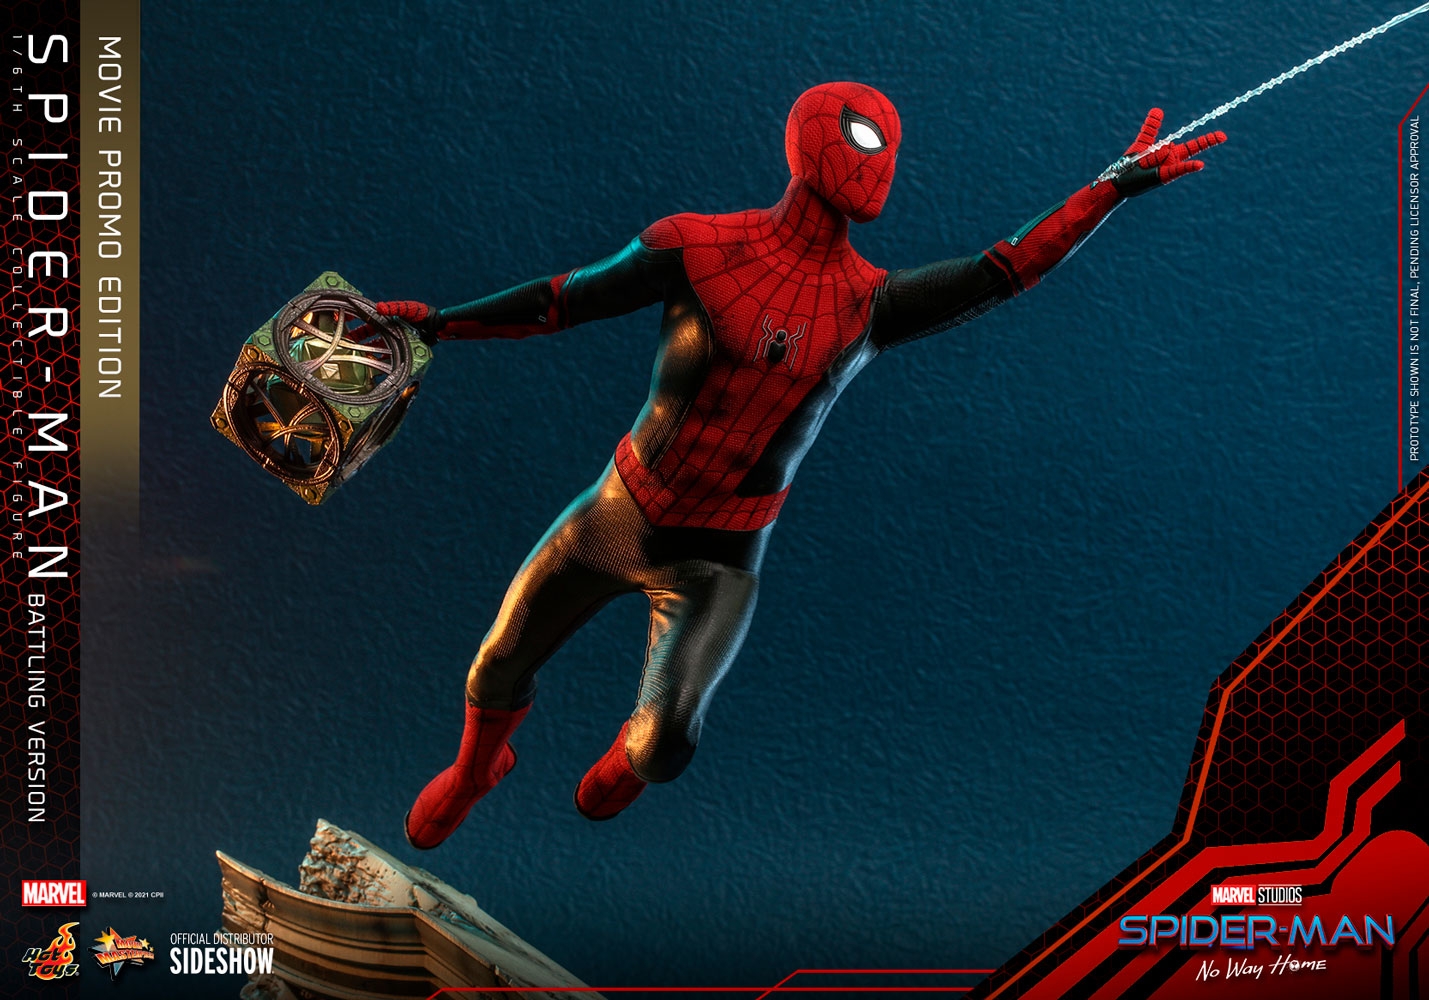 spider-man-movie-promo-edition-sixth-scale-figure-by-hot-toys_marvel_gallery_61a51d97416f6.jpg